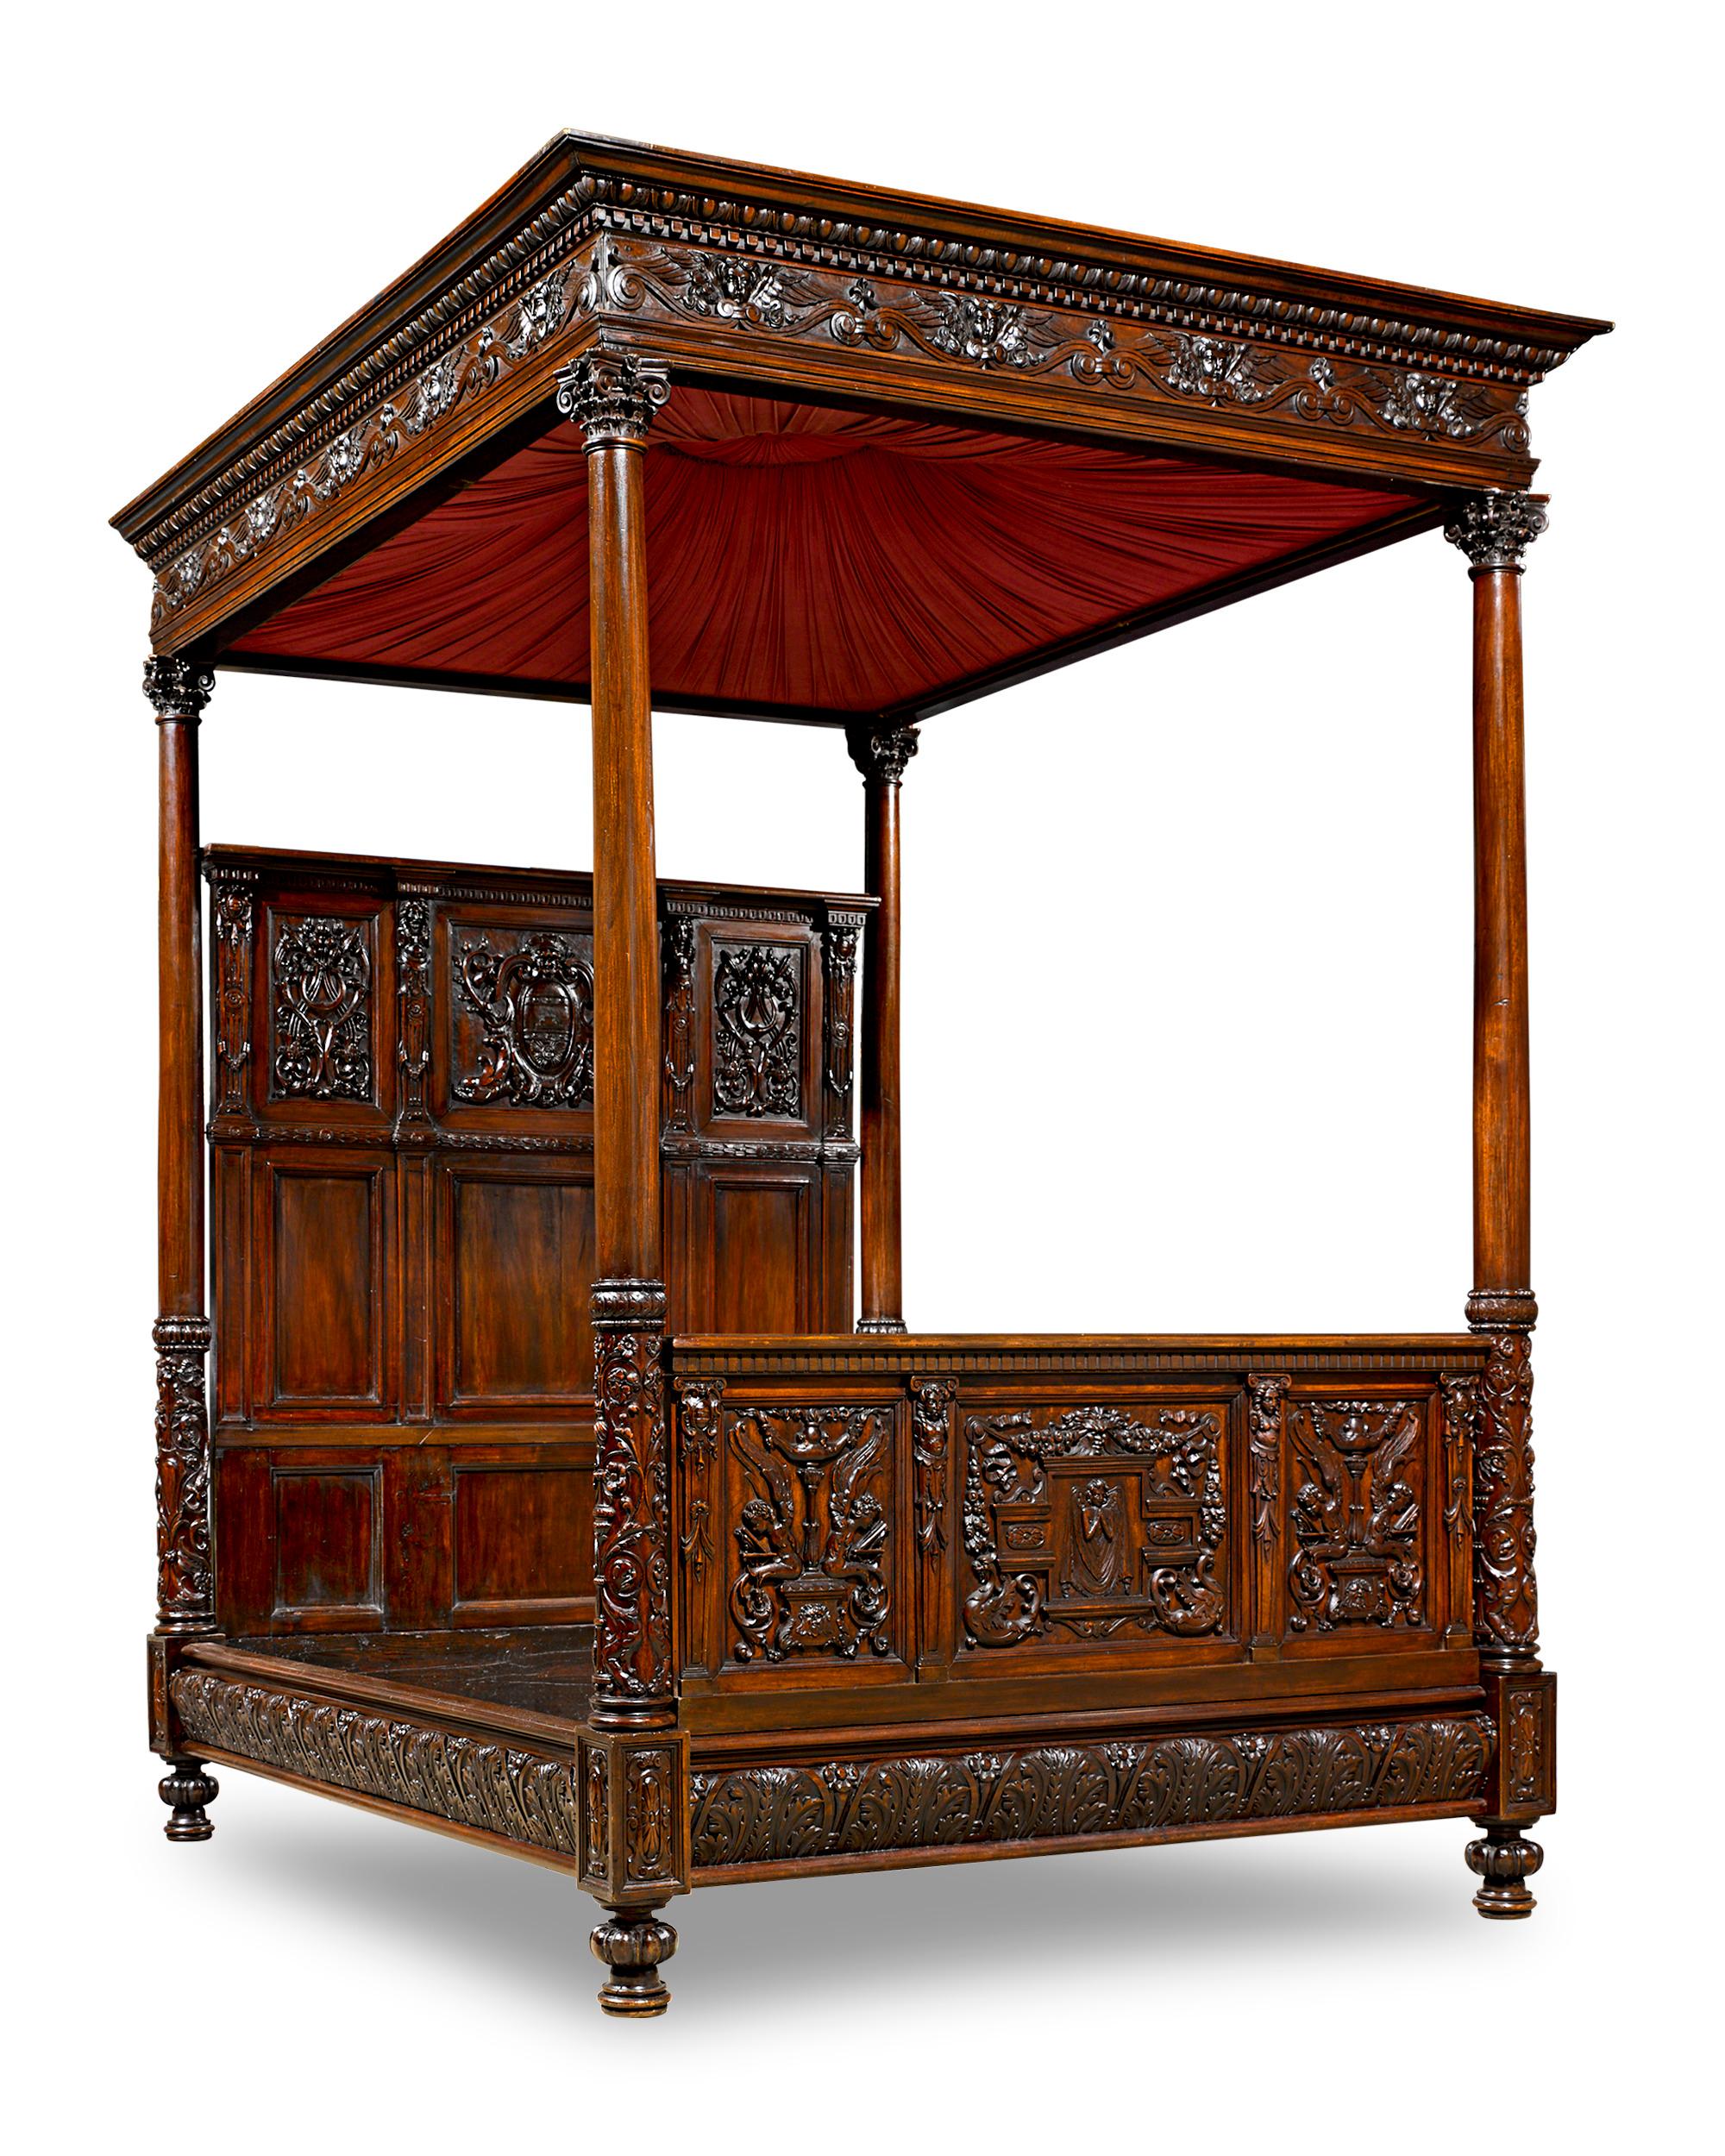 This lavish American oak and walnut tester bed exhibits superior craftsmanship and detail. The design is embellished by elaborate carving throughout in a neoclassical motif the includes shields, crowns, acanthus leaves, laurel wreaths, stylized